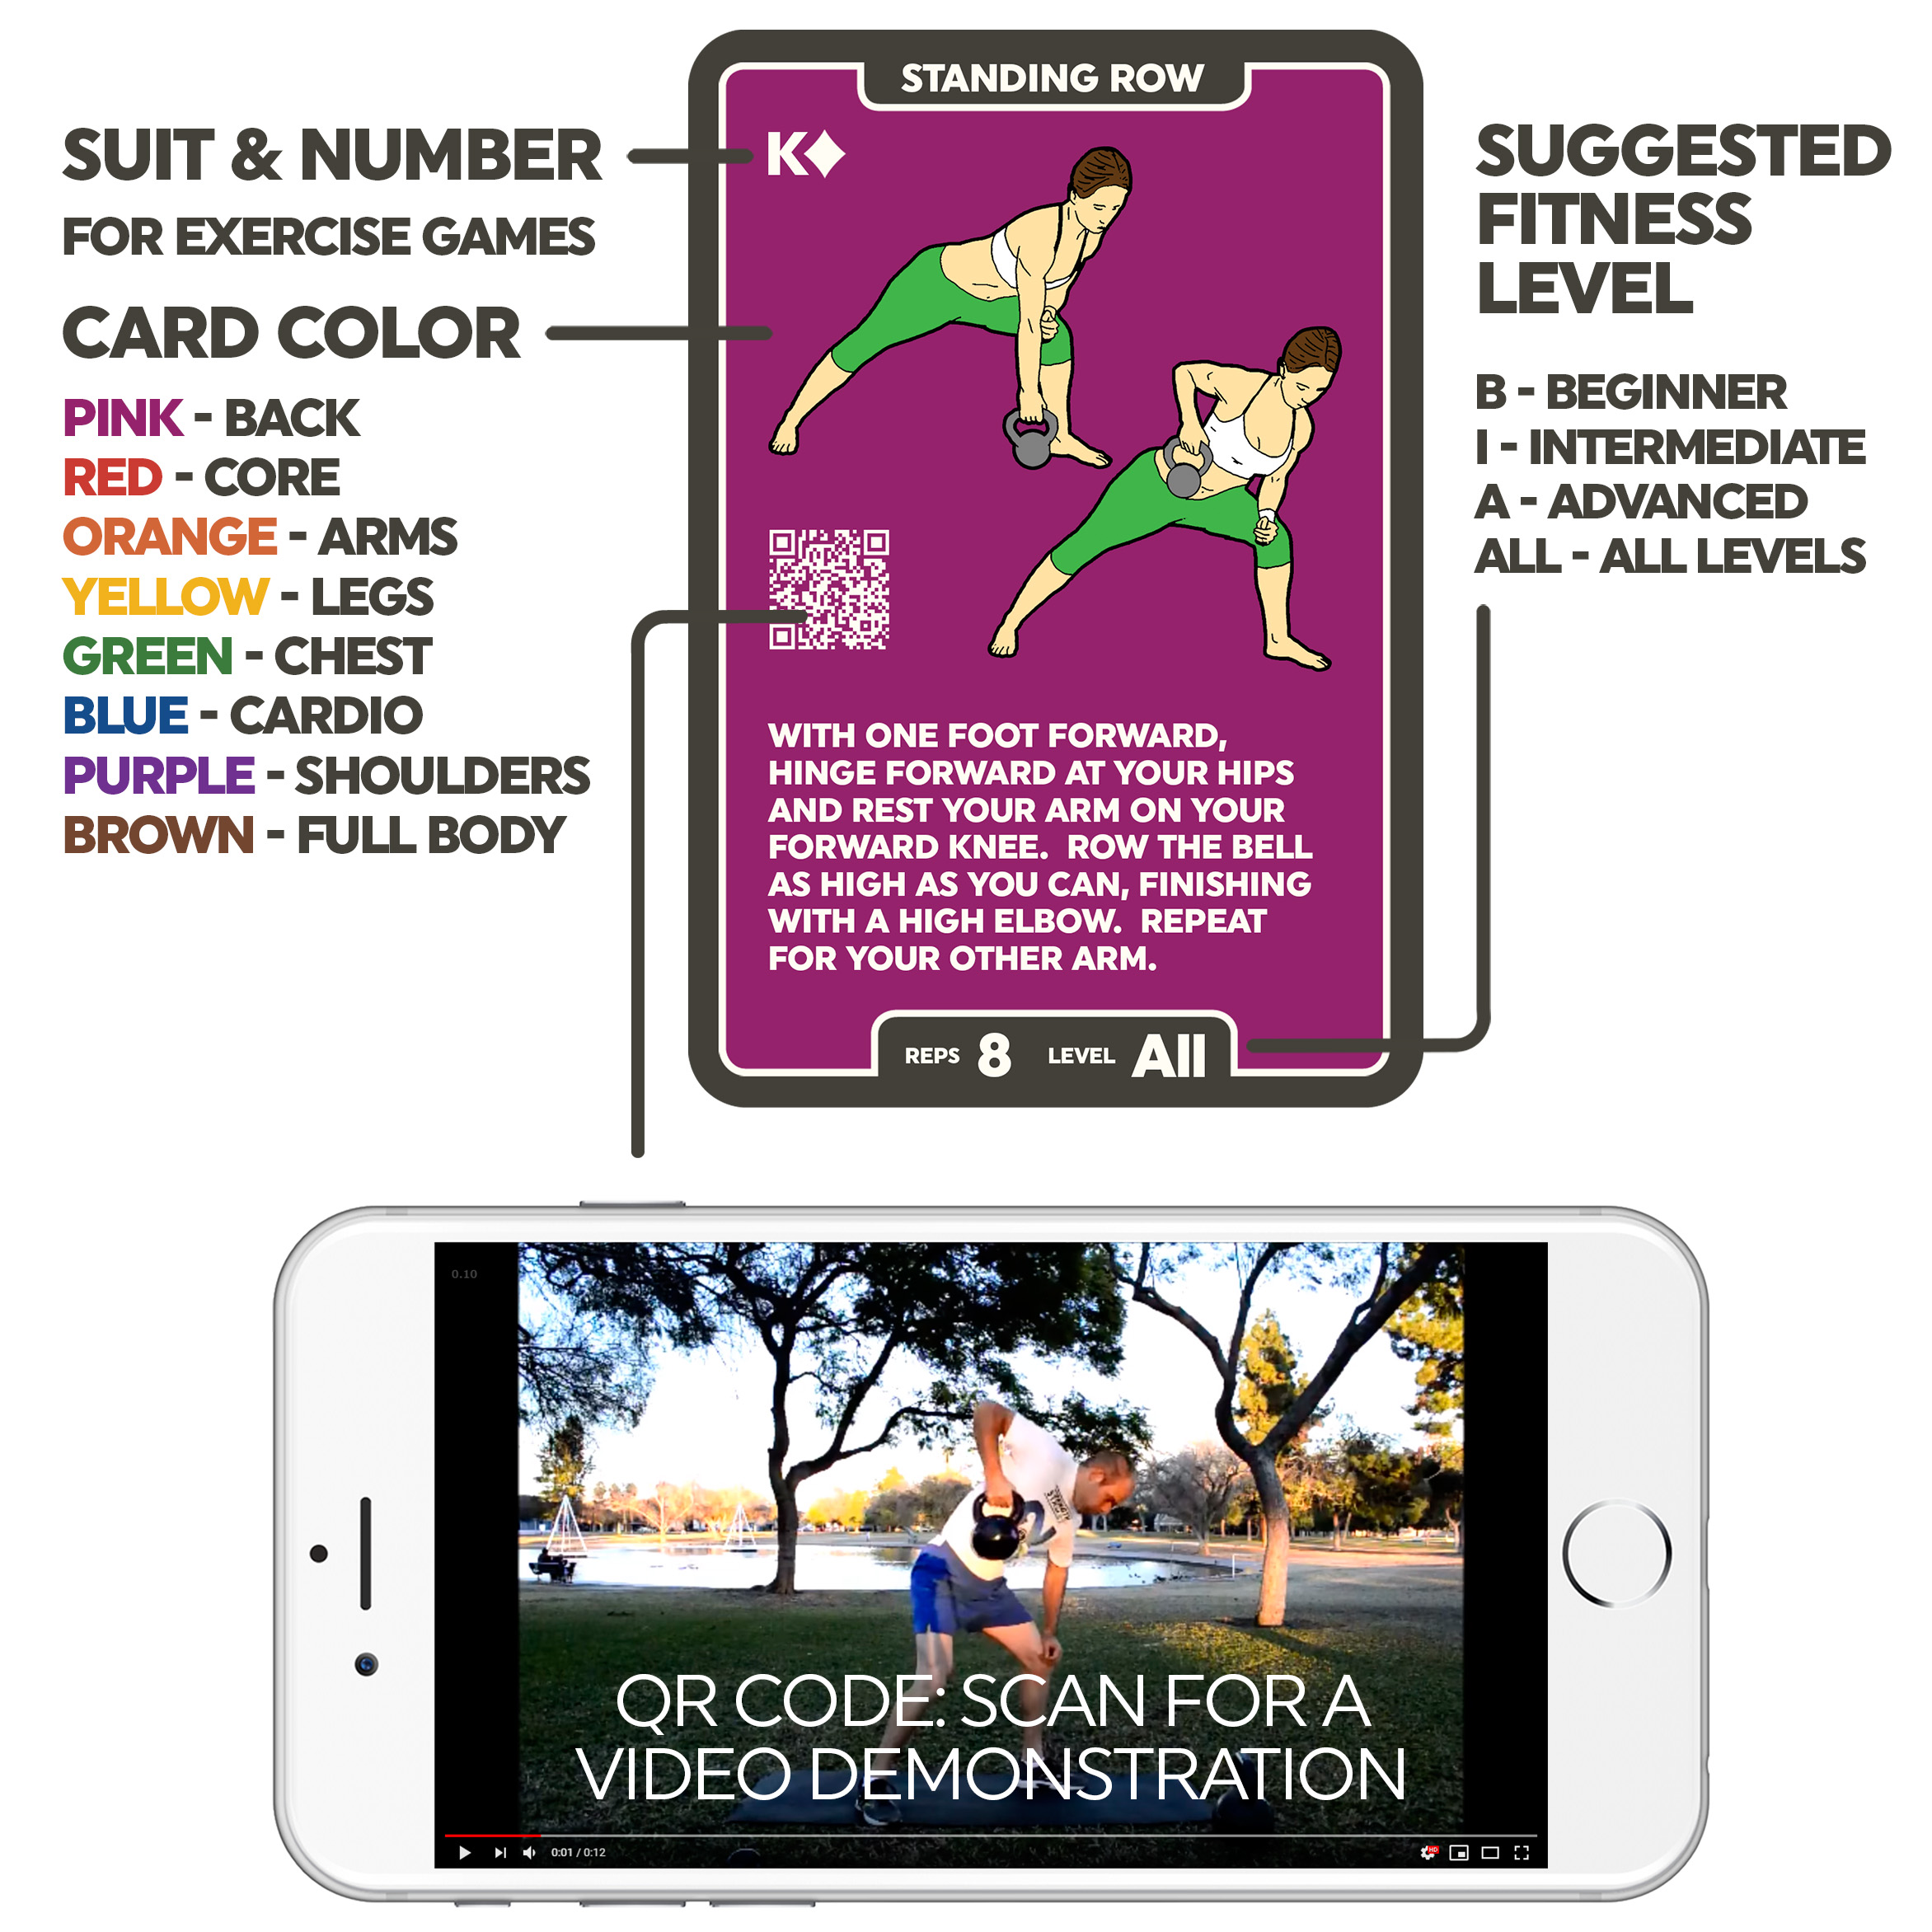 Stack 52 Kettlebell Exercise Cards. Workout Playing Card Game. Video Instructions Included. Learn Kettle Bell Moves and Conditioning Drills. Home Fitness Training Program. (2019 Mega Pack) - image 5 of 10